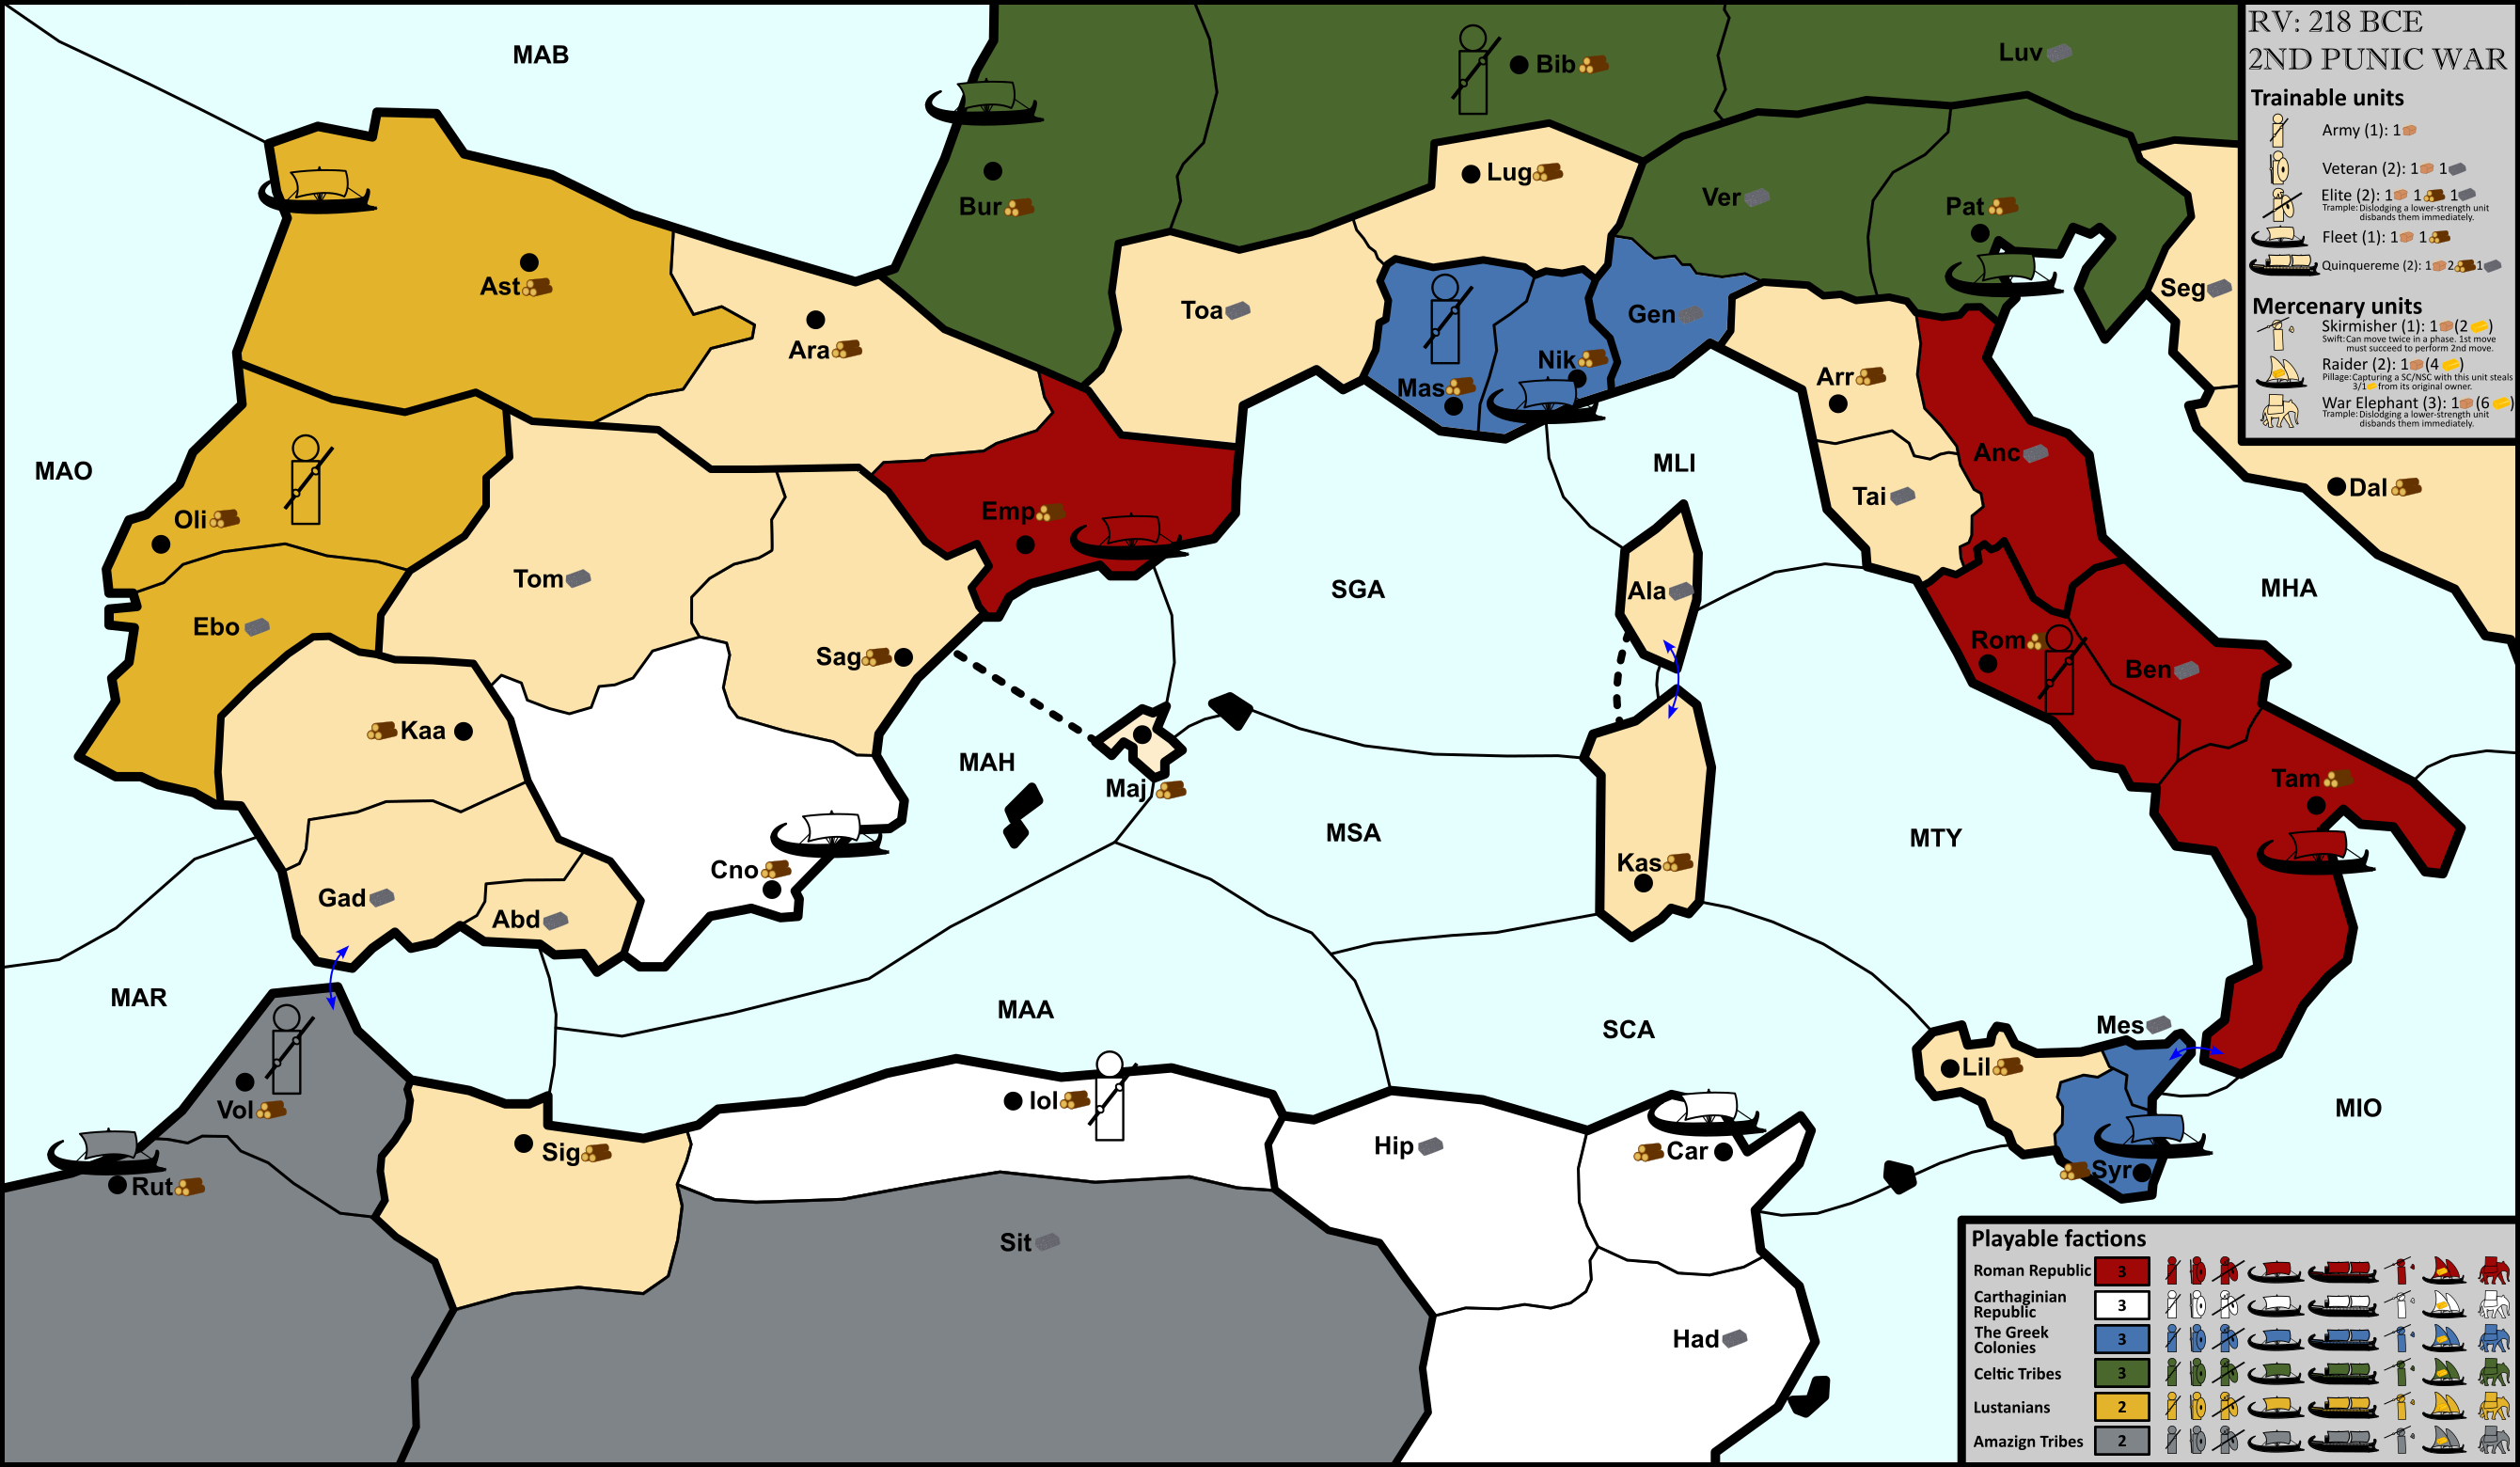 6 - second punic war map 1.0.png